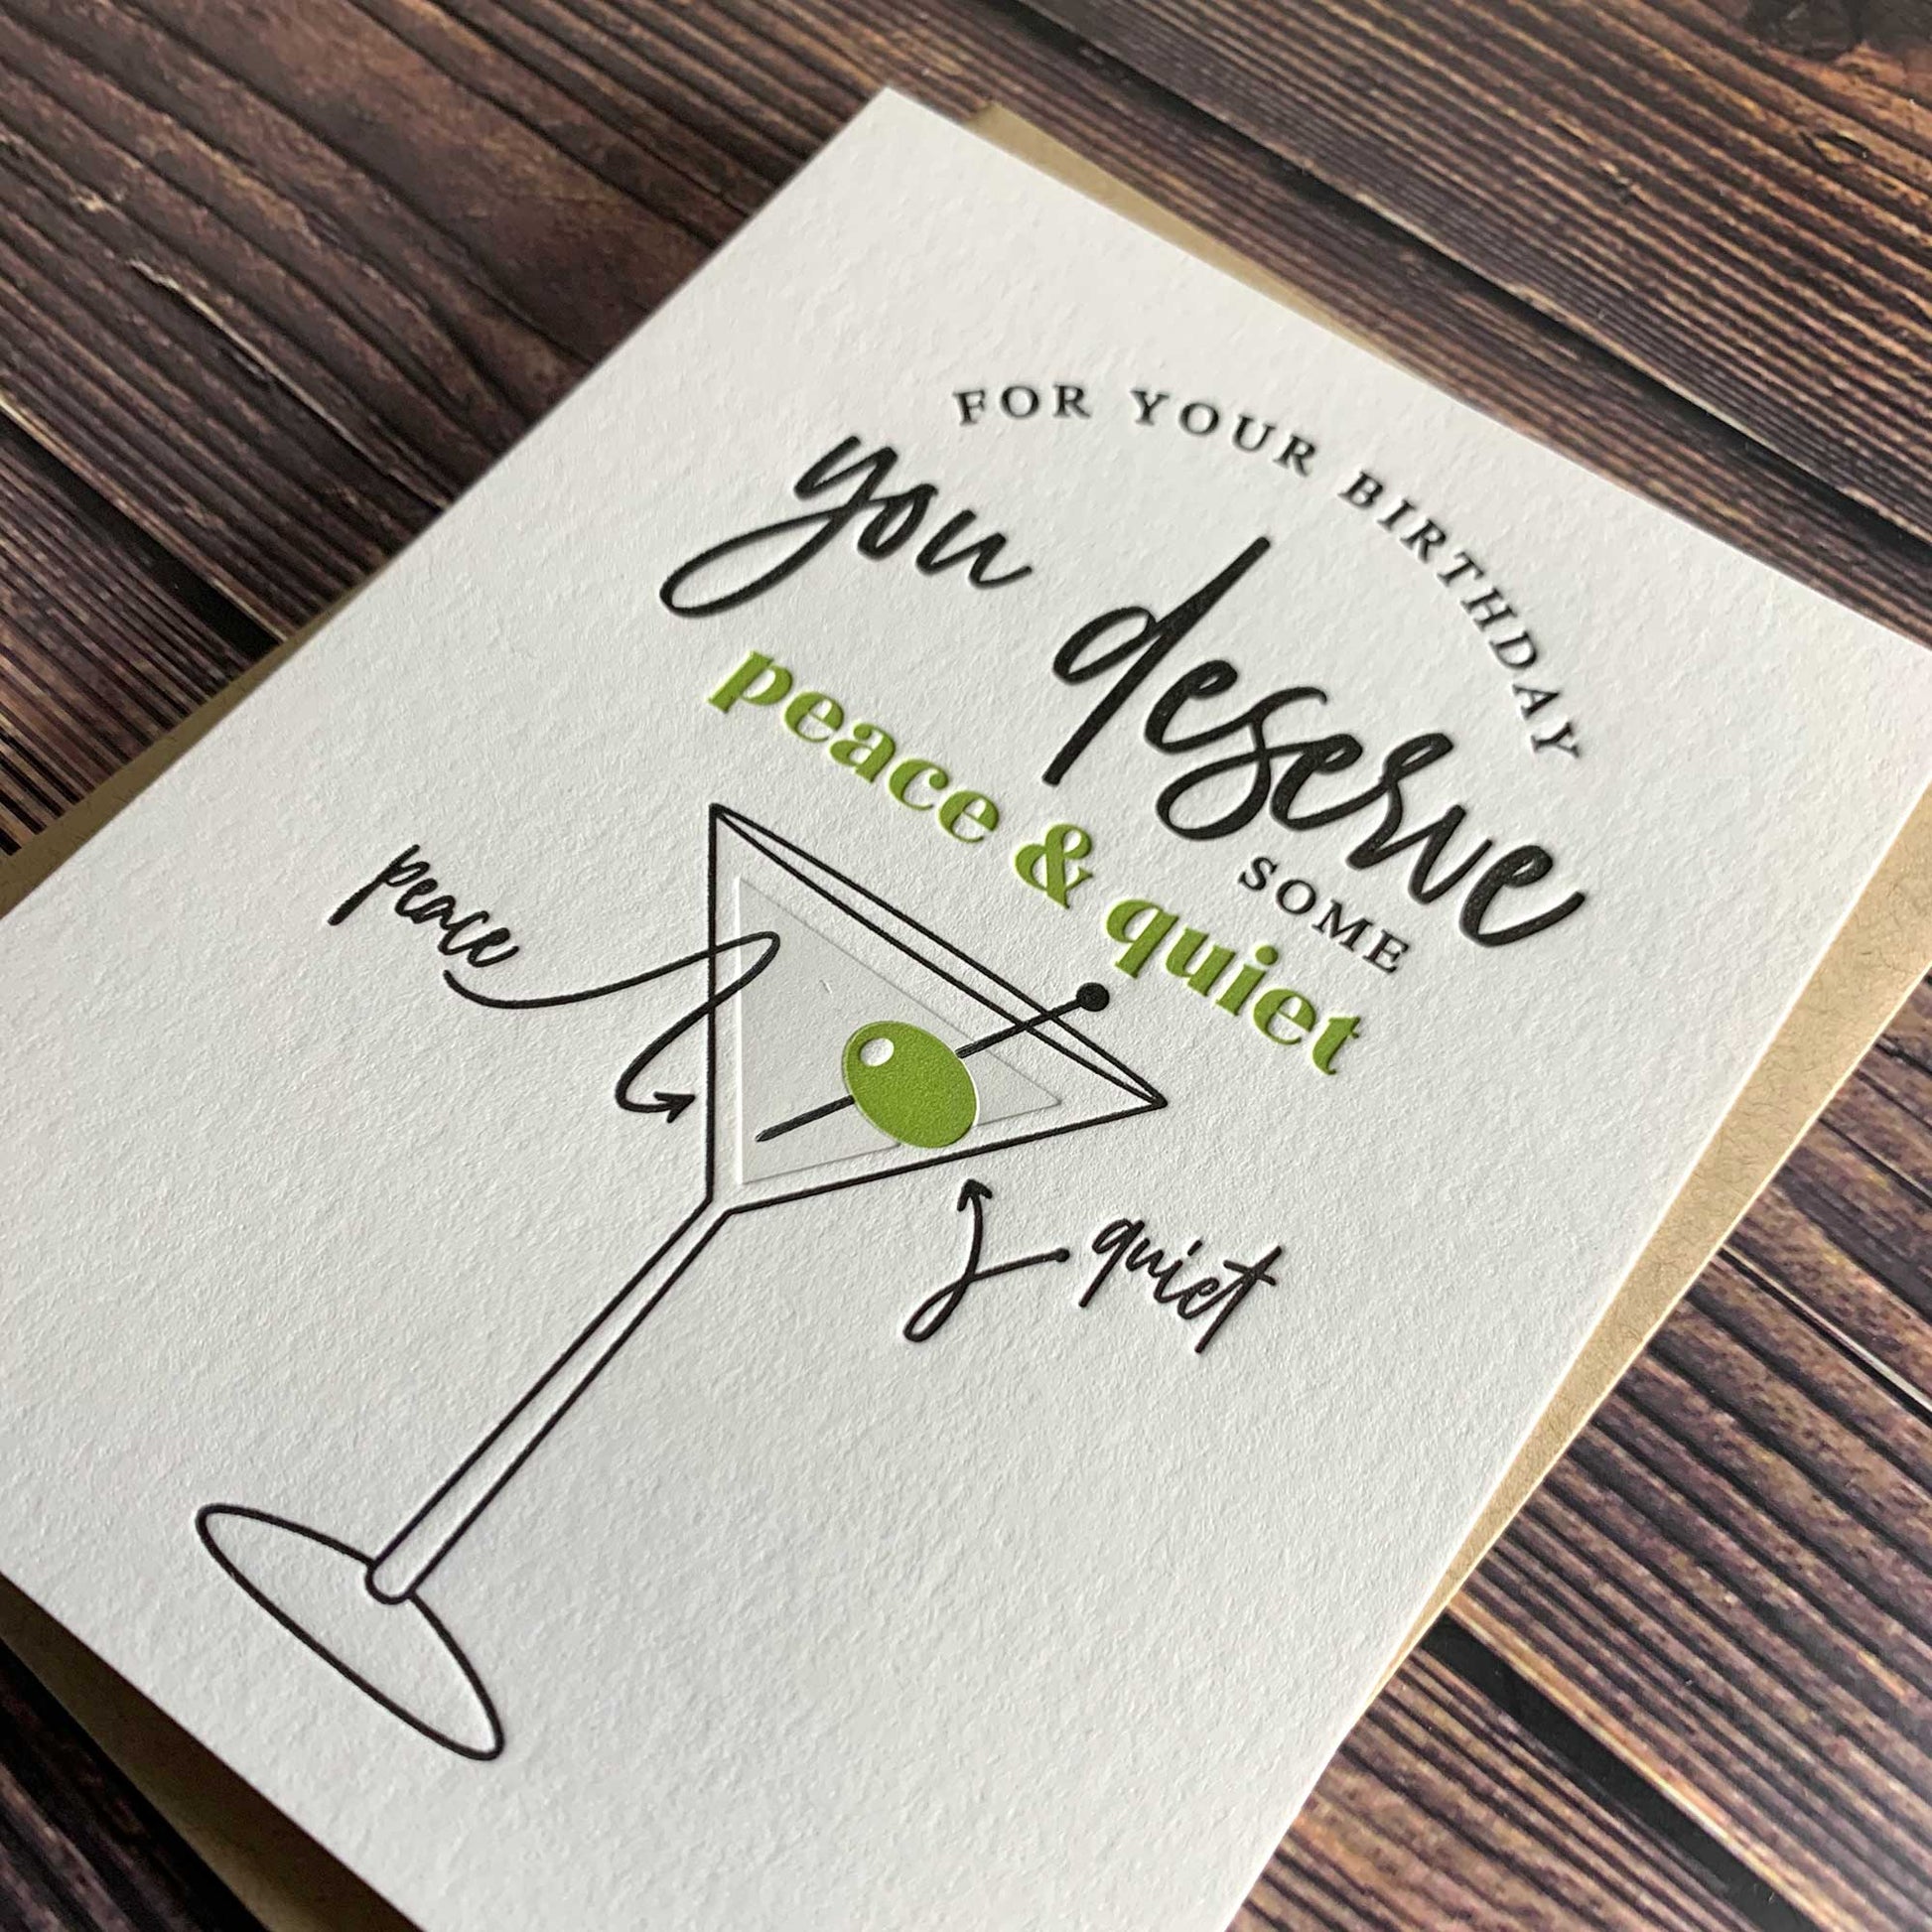 For your birthday you deserve some peace & quiet, peace is vodka, quiet is the olive, dirty martini birthday Card, Letterpress printed, view shows letterpress impression, includes envelope